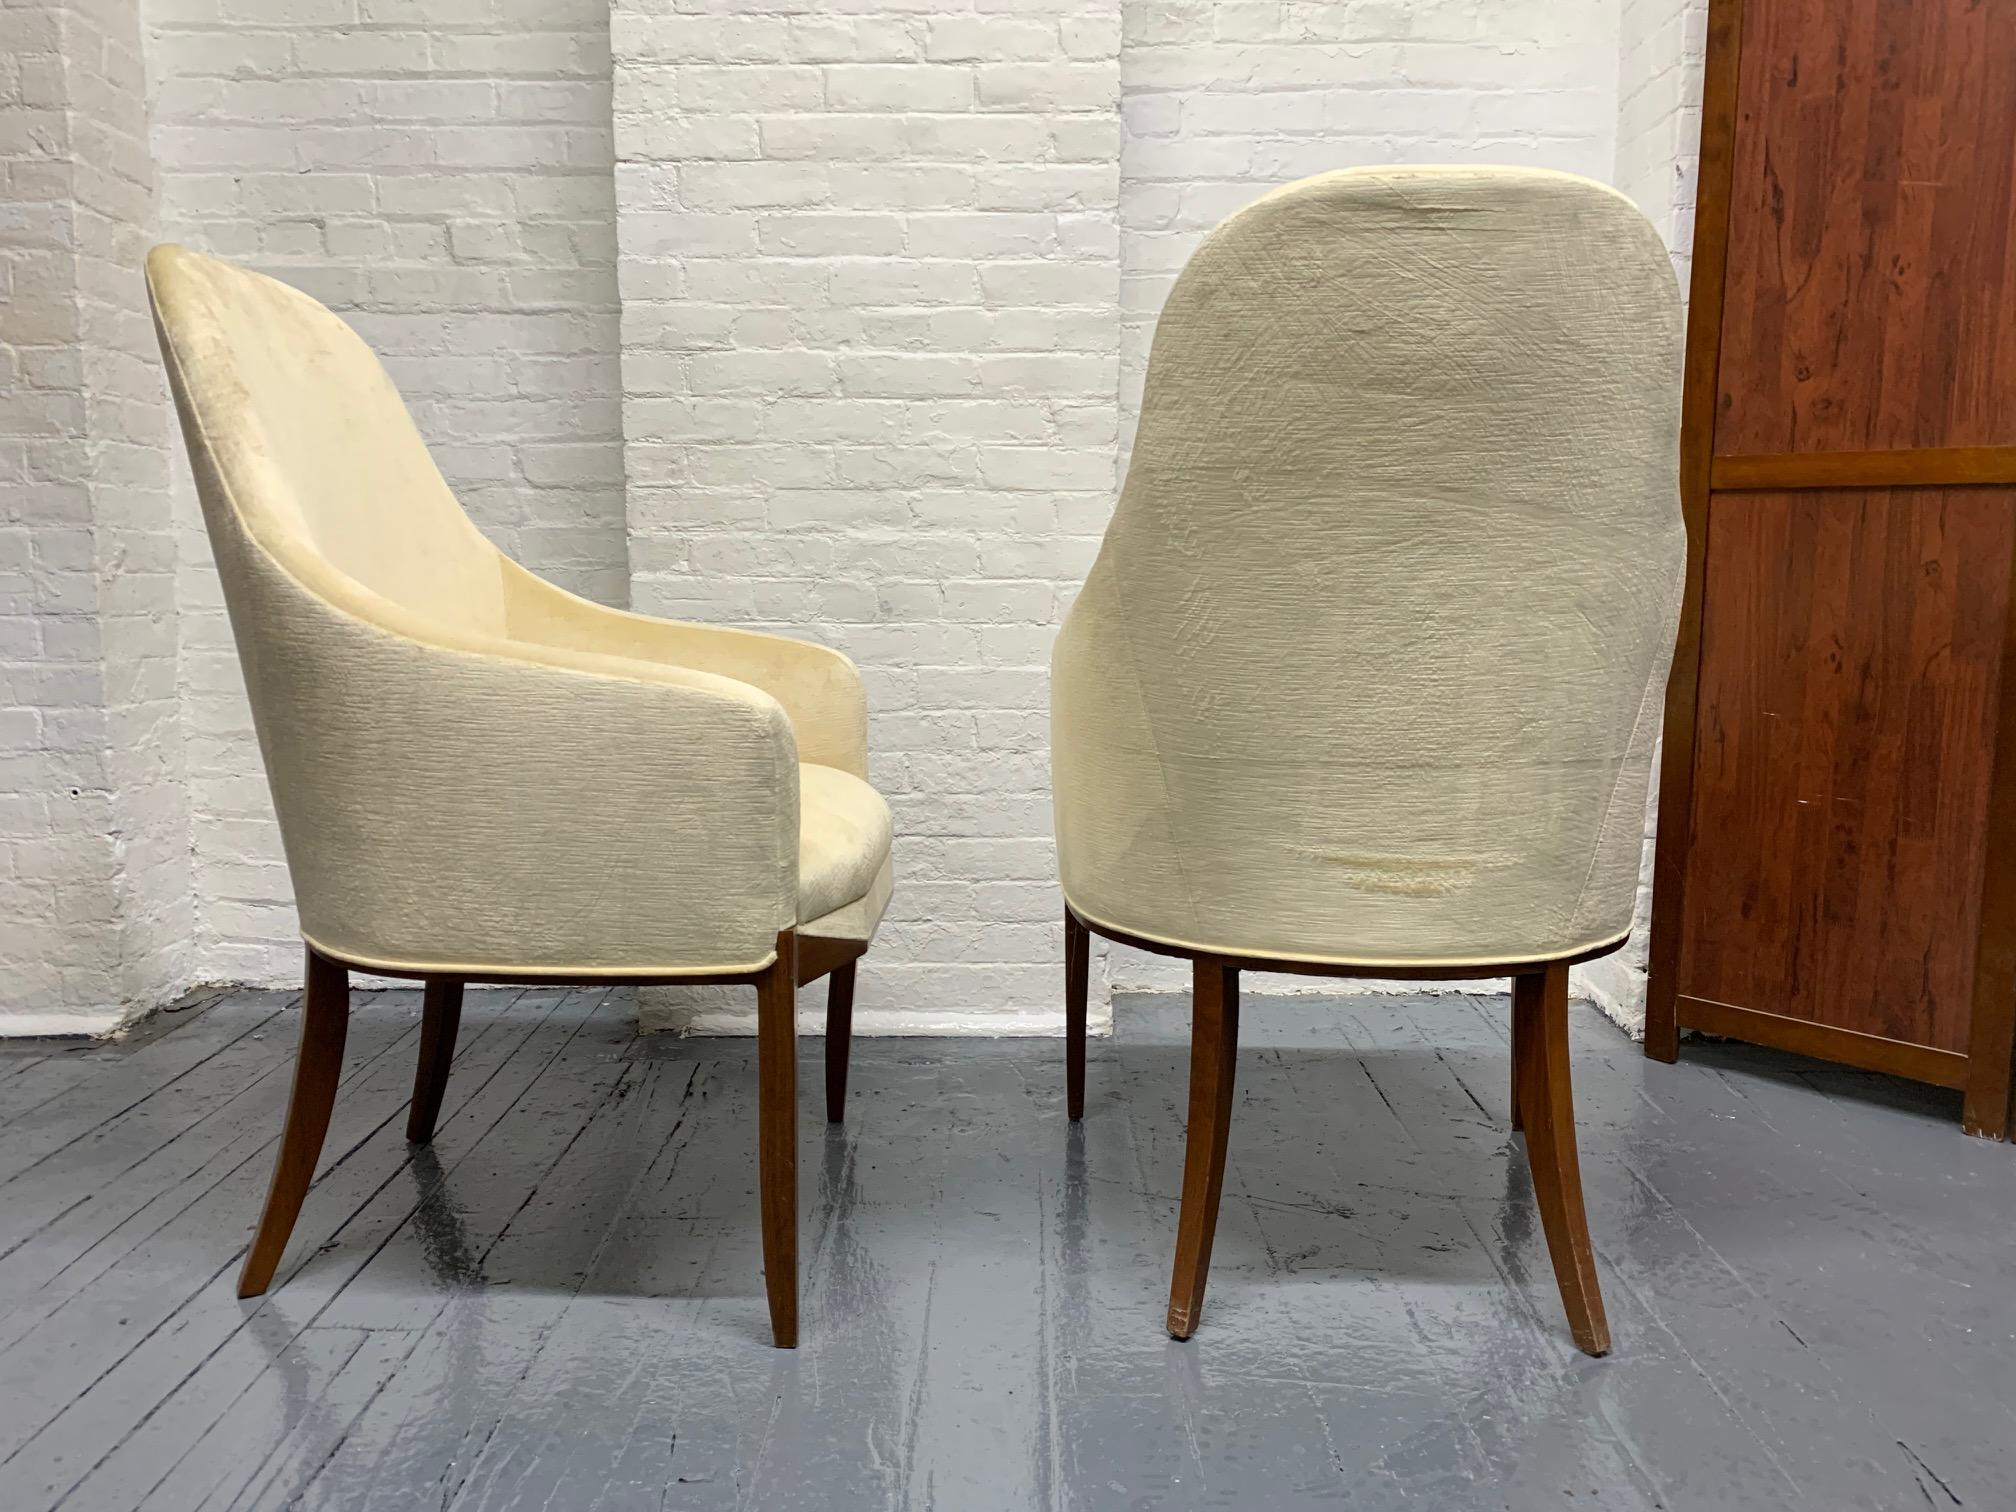 Pair of Art Deco walnut side chairs with a solid walnut frame and mohair fabric..
  